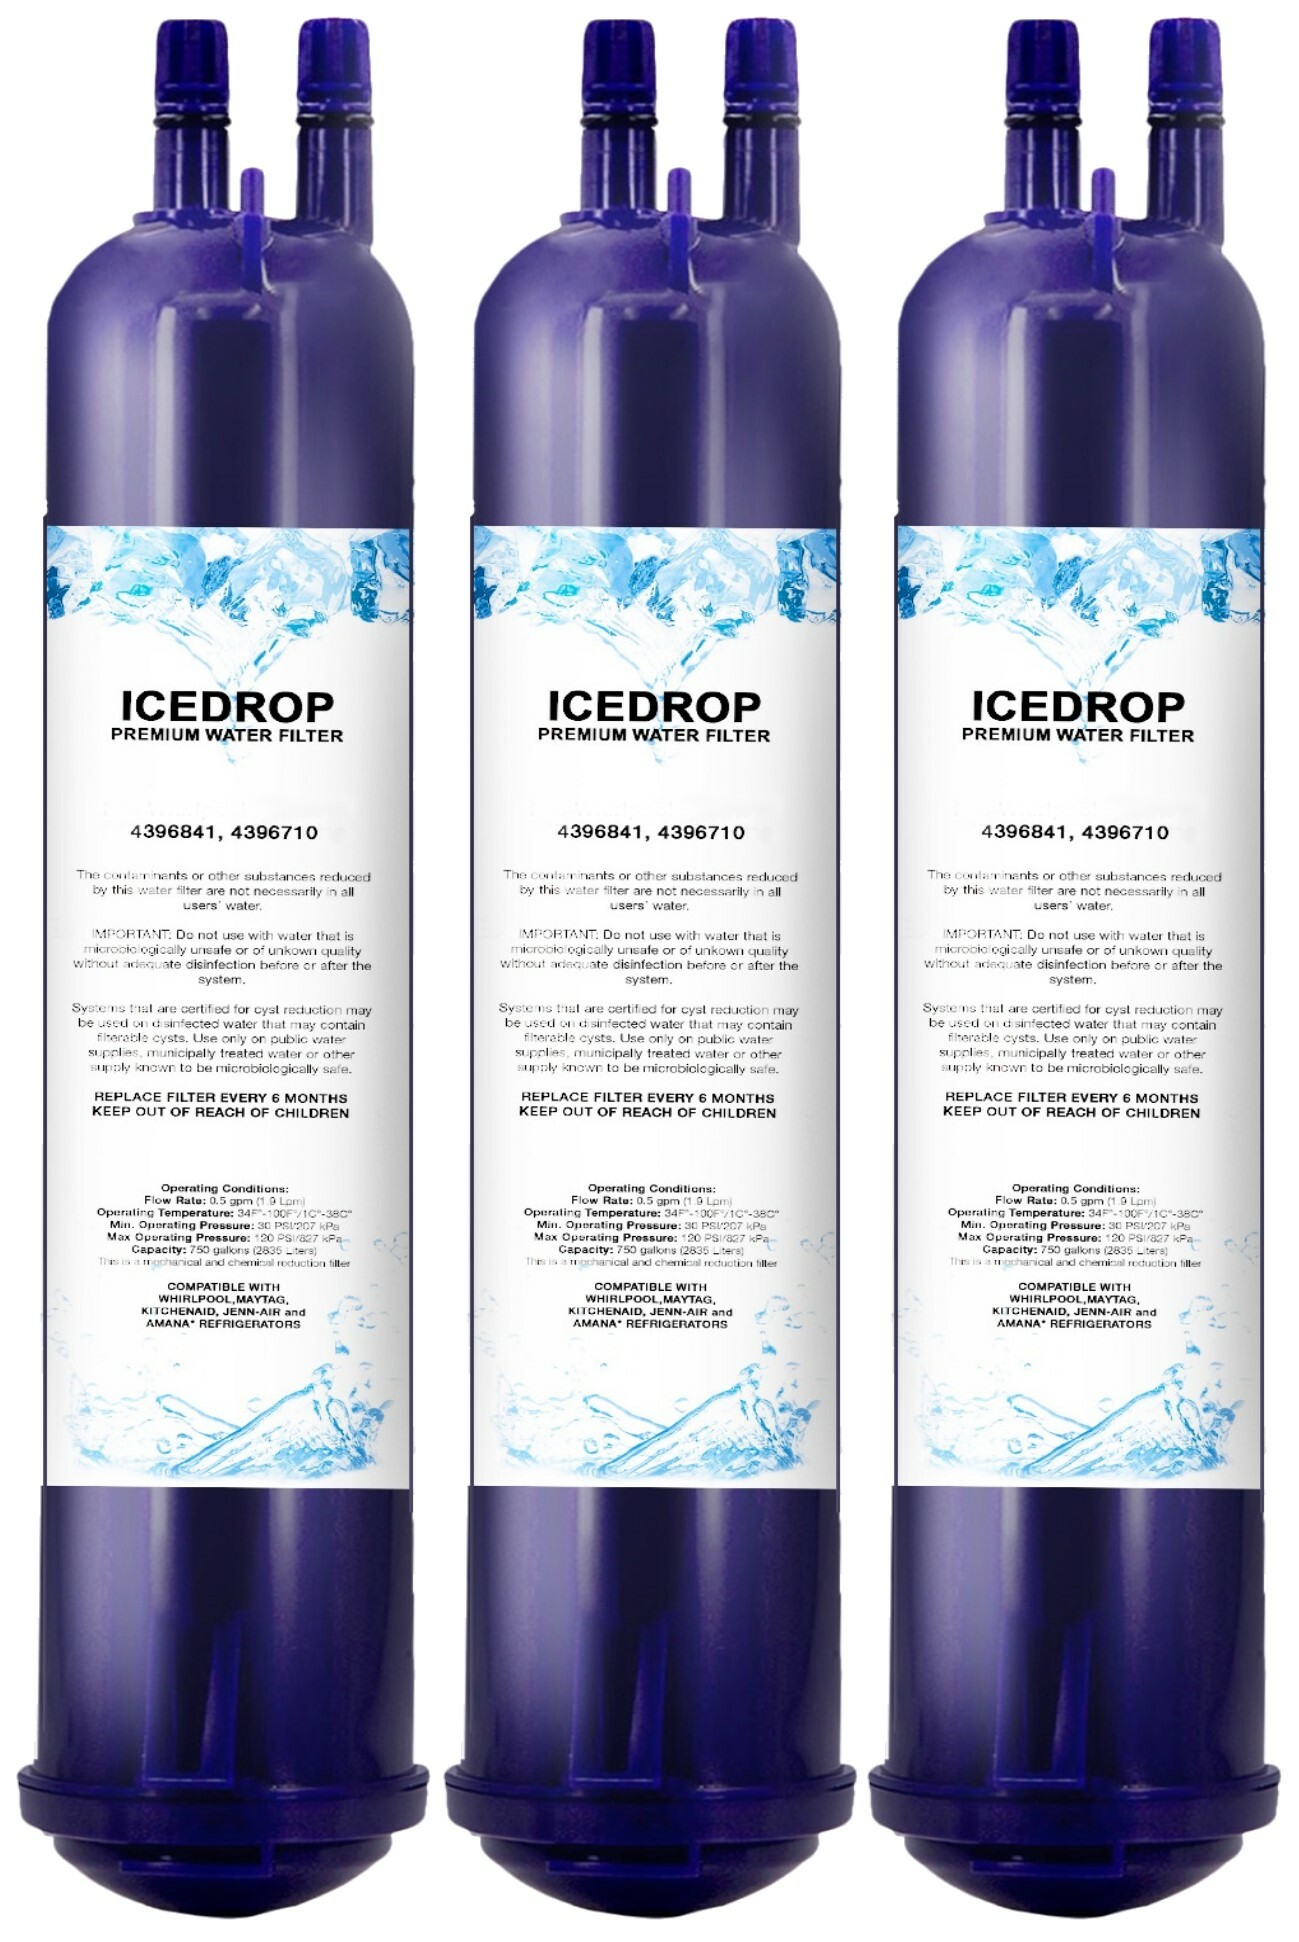 Ice Drop Refrigerator Water Filter Compatible with Filter3C, 4396841, 4396842, LT1WB2L, EFF-6008, EDR3RXD1B, 4396711 (3 Pack)